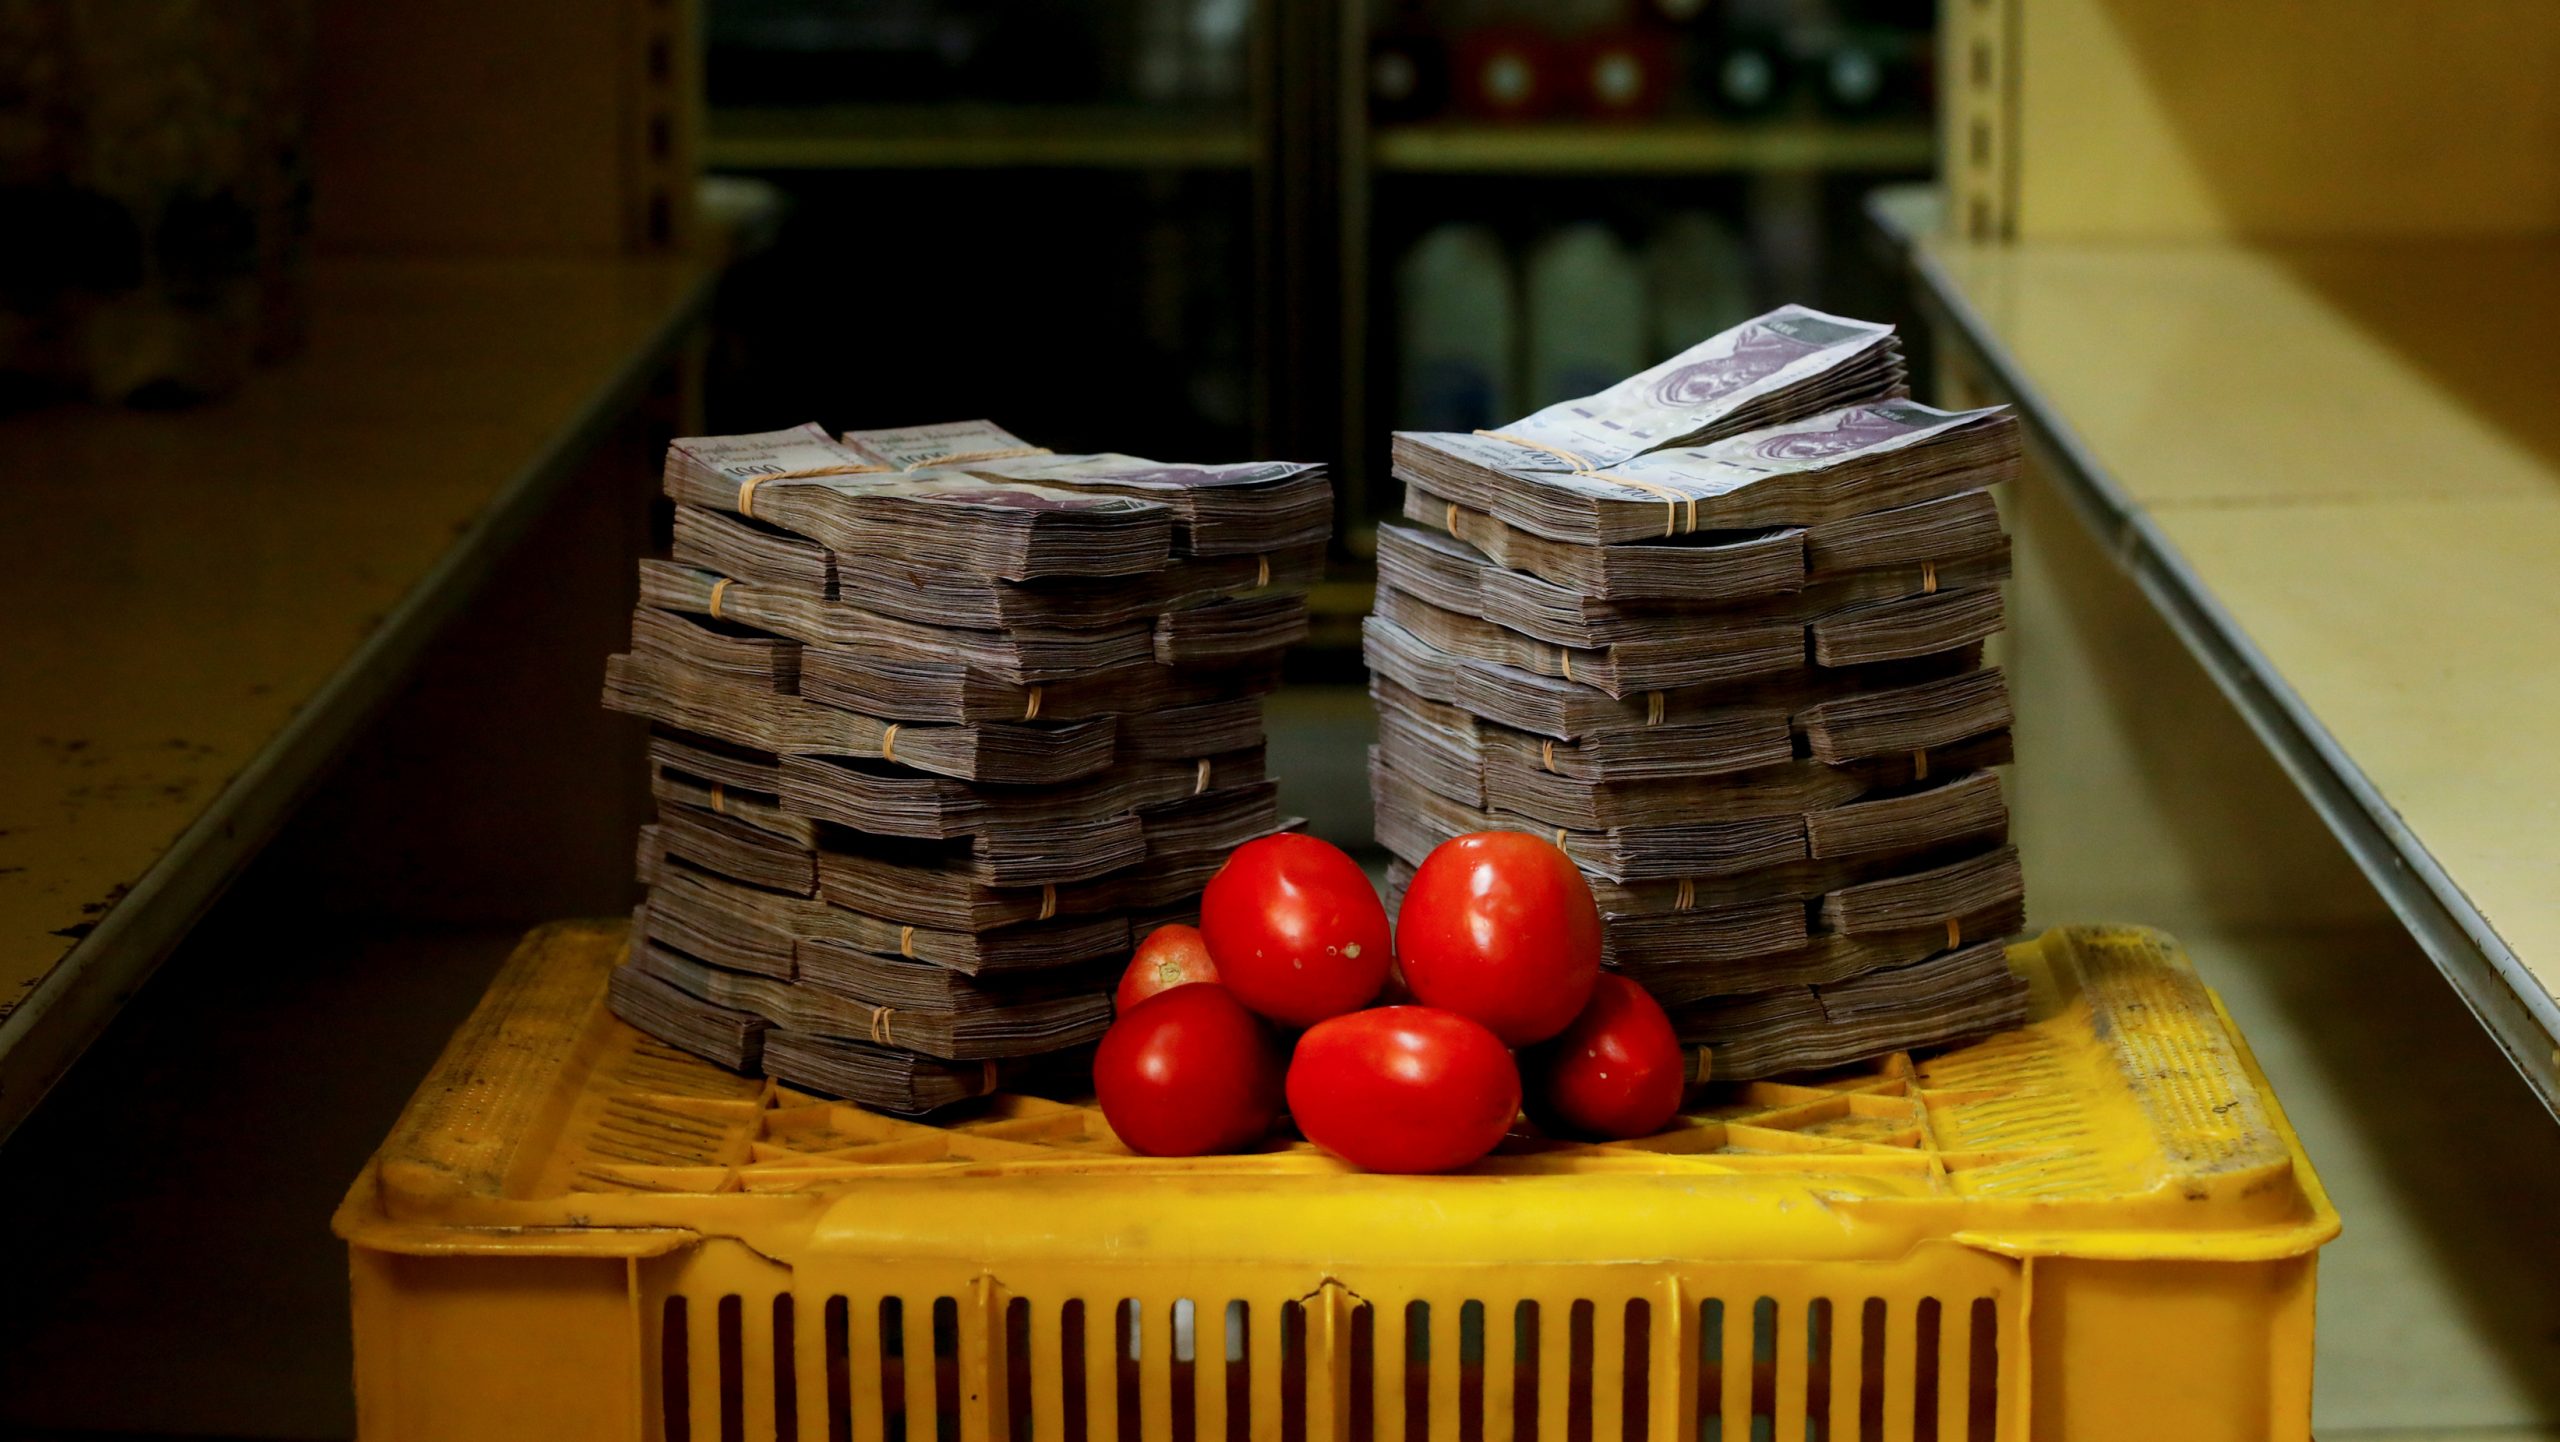 A Kilogram, Or Just Over 2 Pounds, Of Tomatoes Sits Next To The 5 Million "strong" Bolivars Needed Just To Buy The Bunch At An Informal Market In A Low-income Neighborhood Of Venezuela's Capital, Caracas.